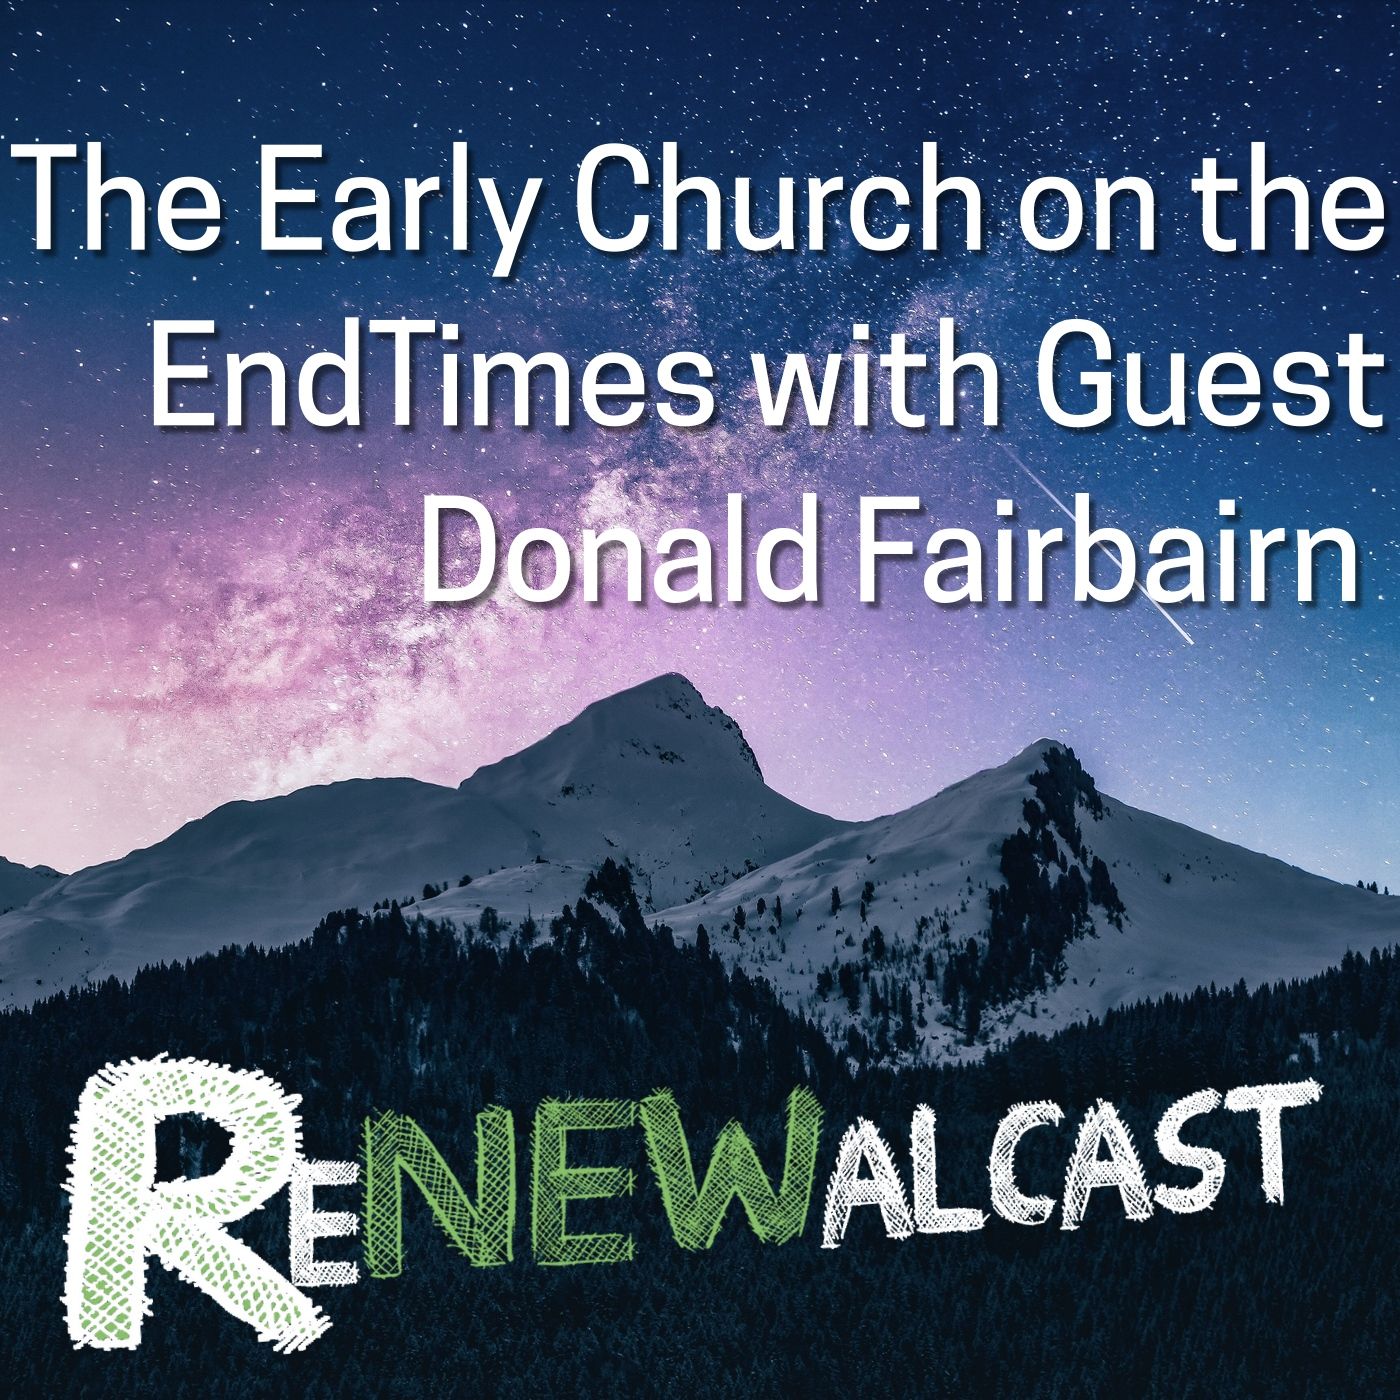 The Early Church on the EndTimes with Guest Donald Fairbairn